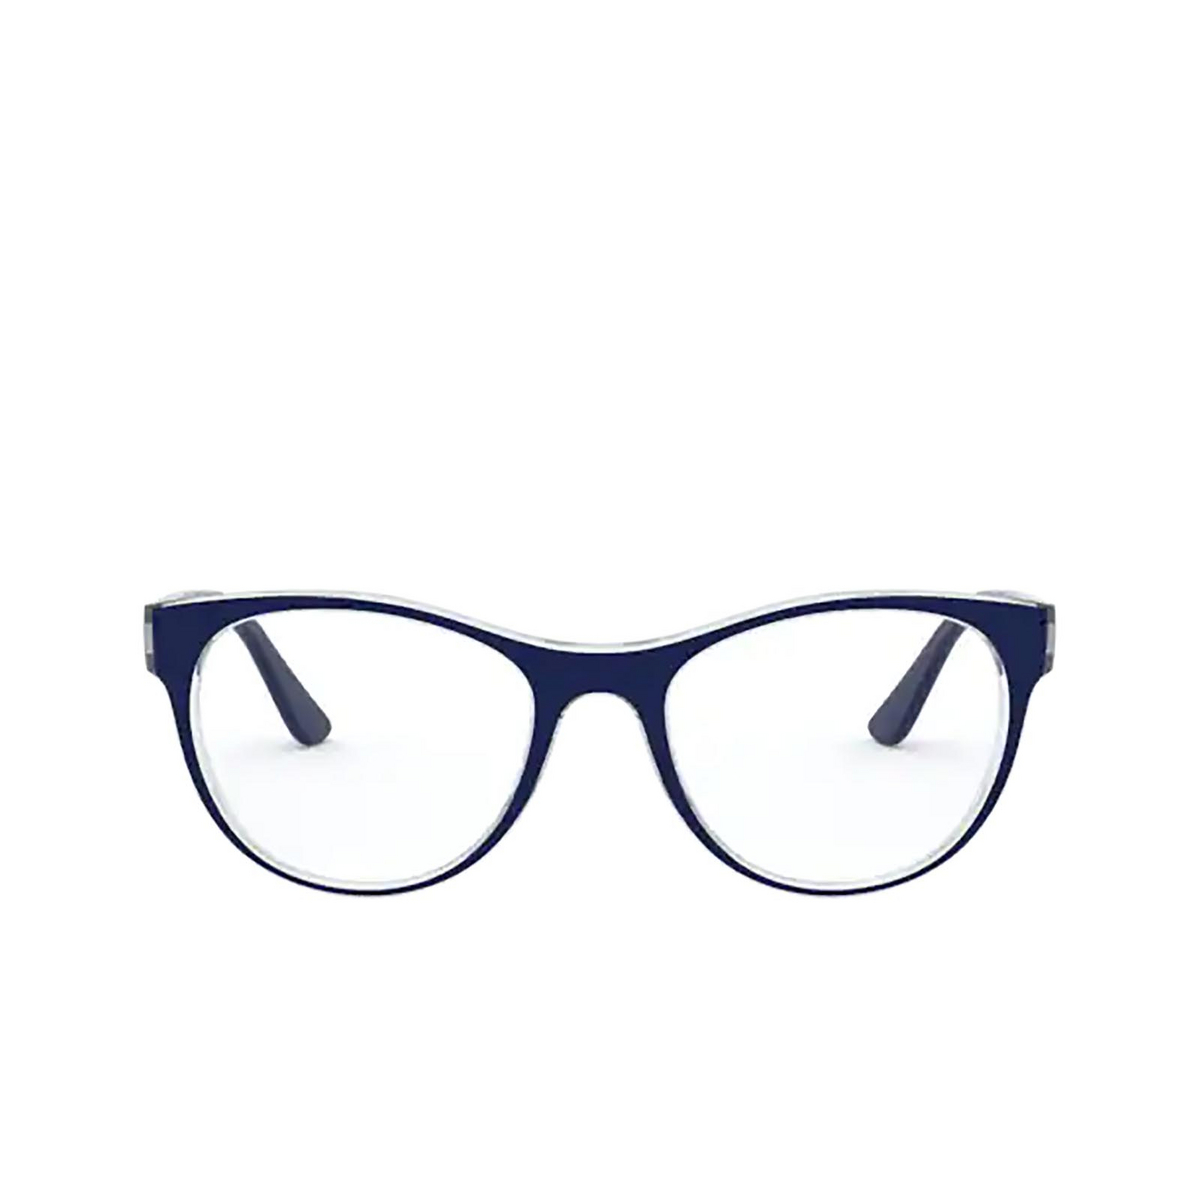 Vogue® Cat-eye Eyeglasses: VO5336 color Top Blue / Serigraphy 2841 - front view.